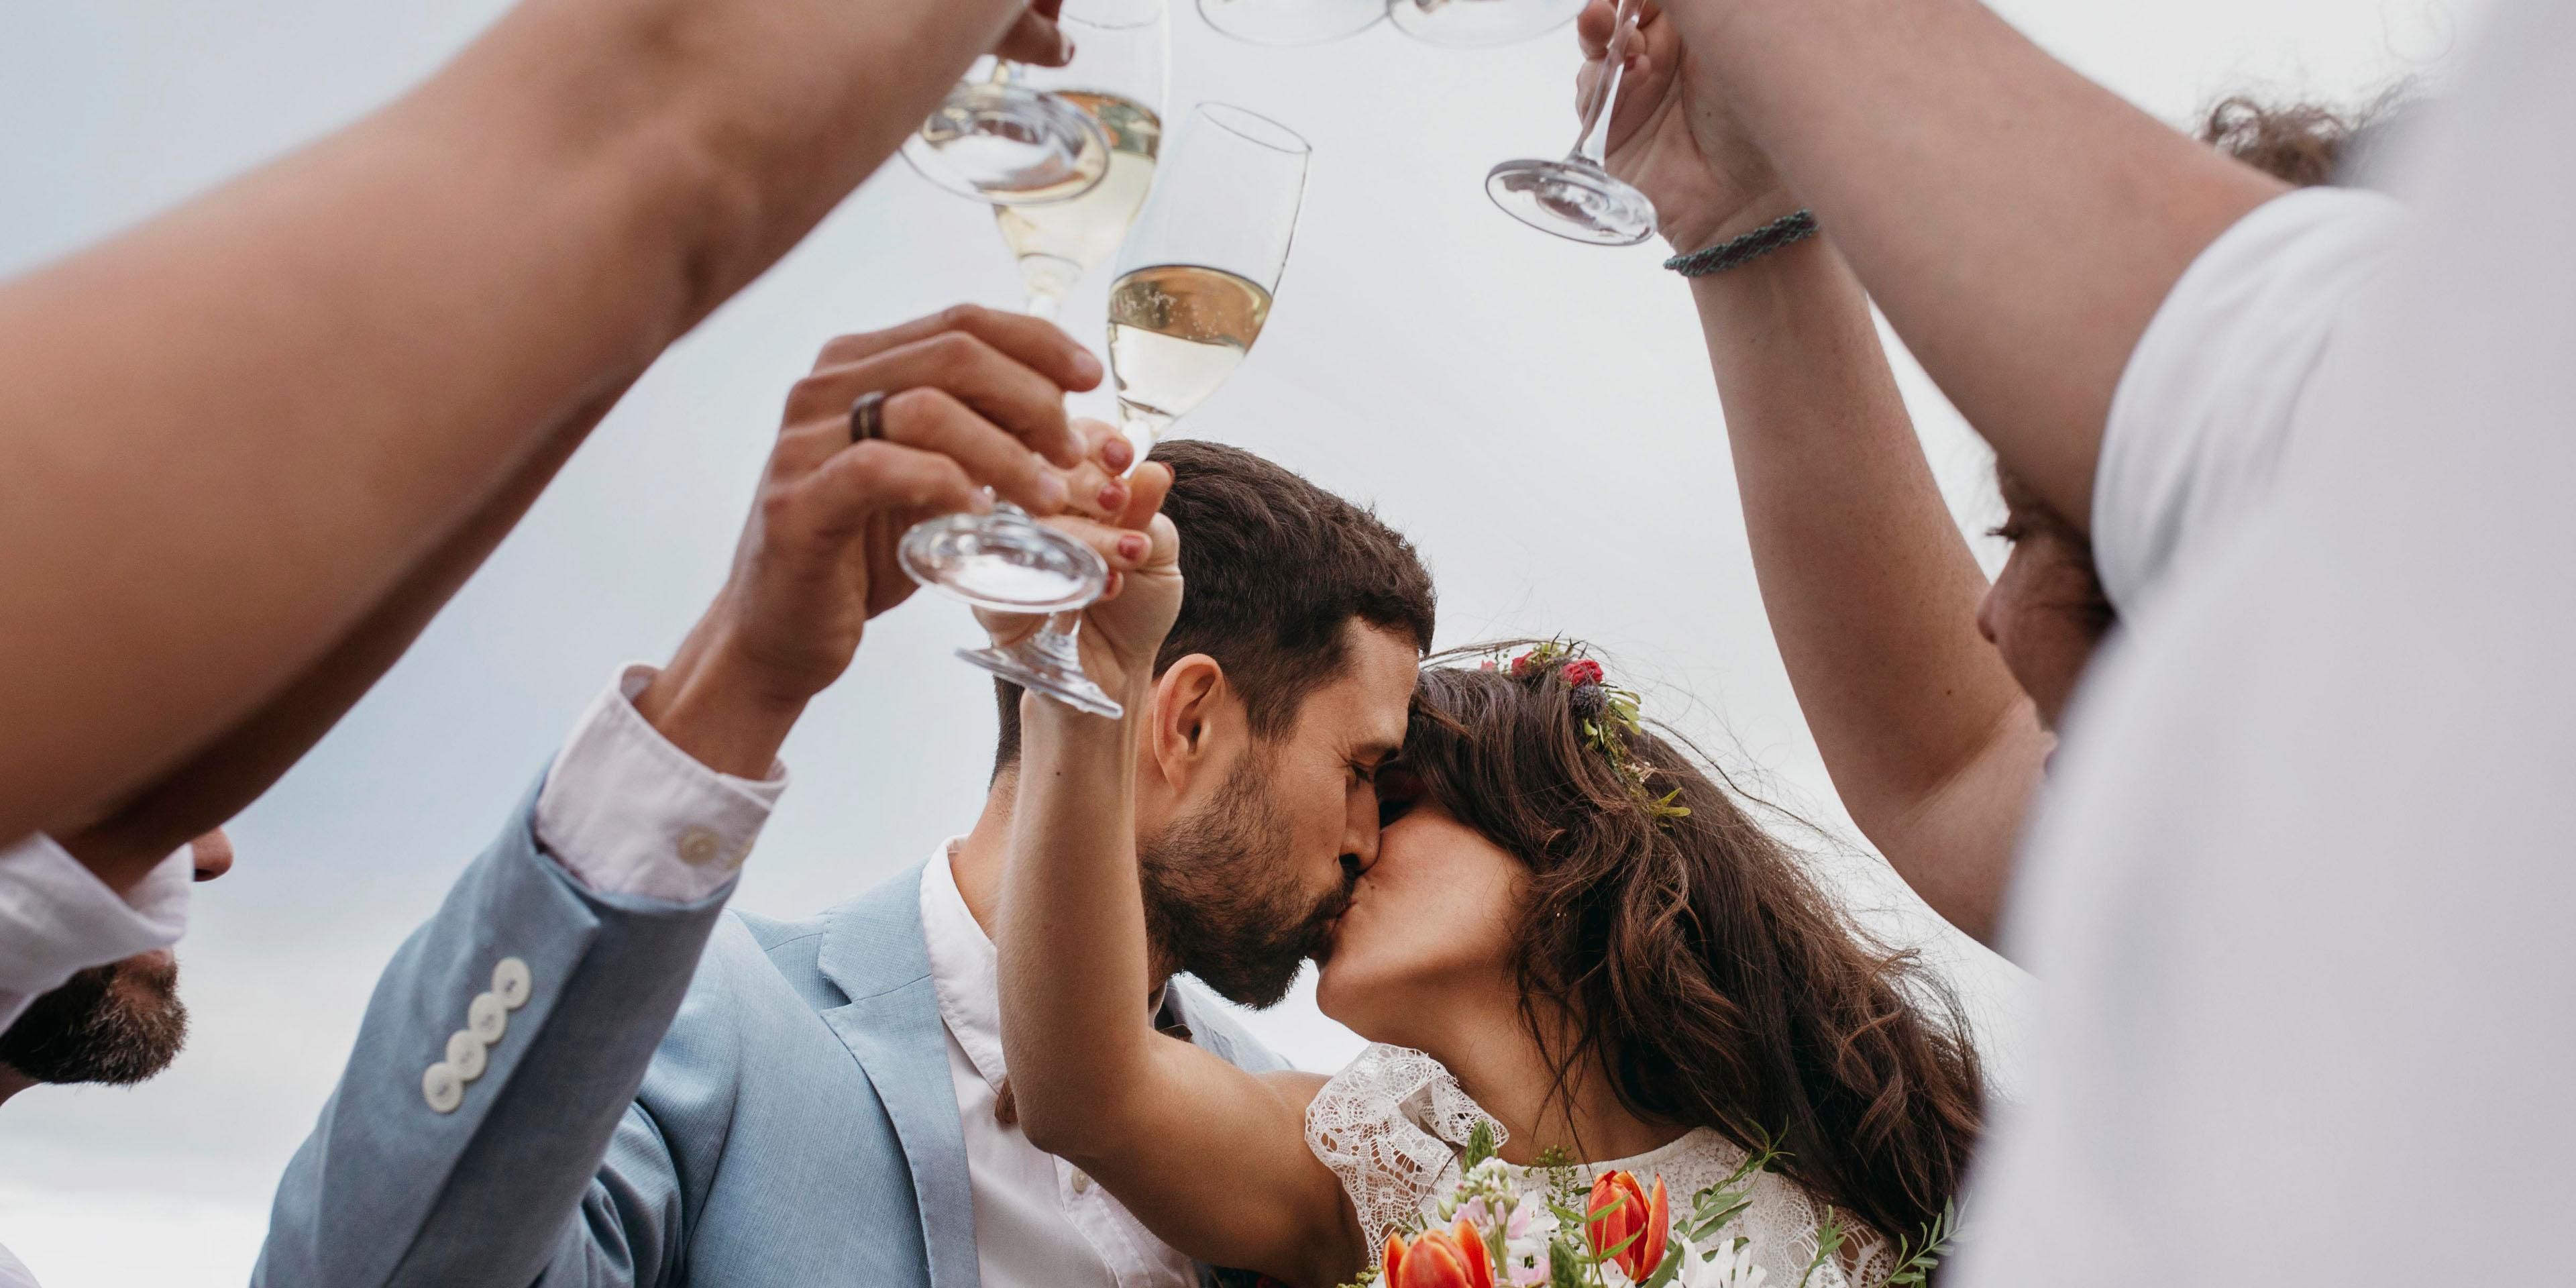 Newly engaged? Let us celebrate the start of your forever a memorable way. Contact us now to organize that first party together!
